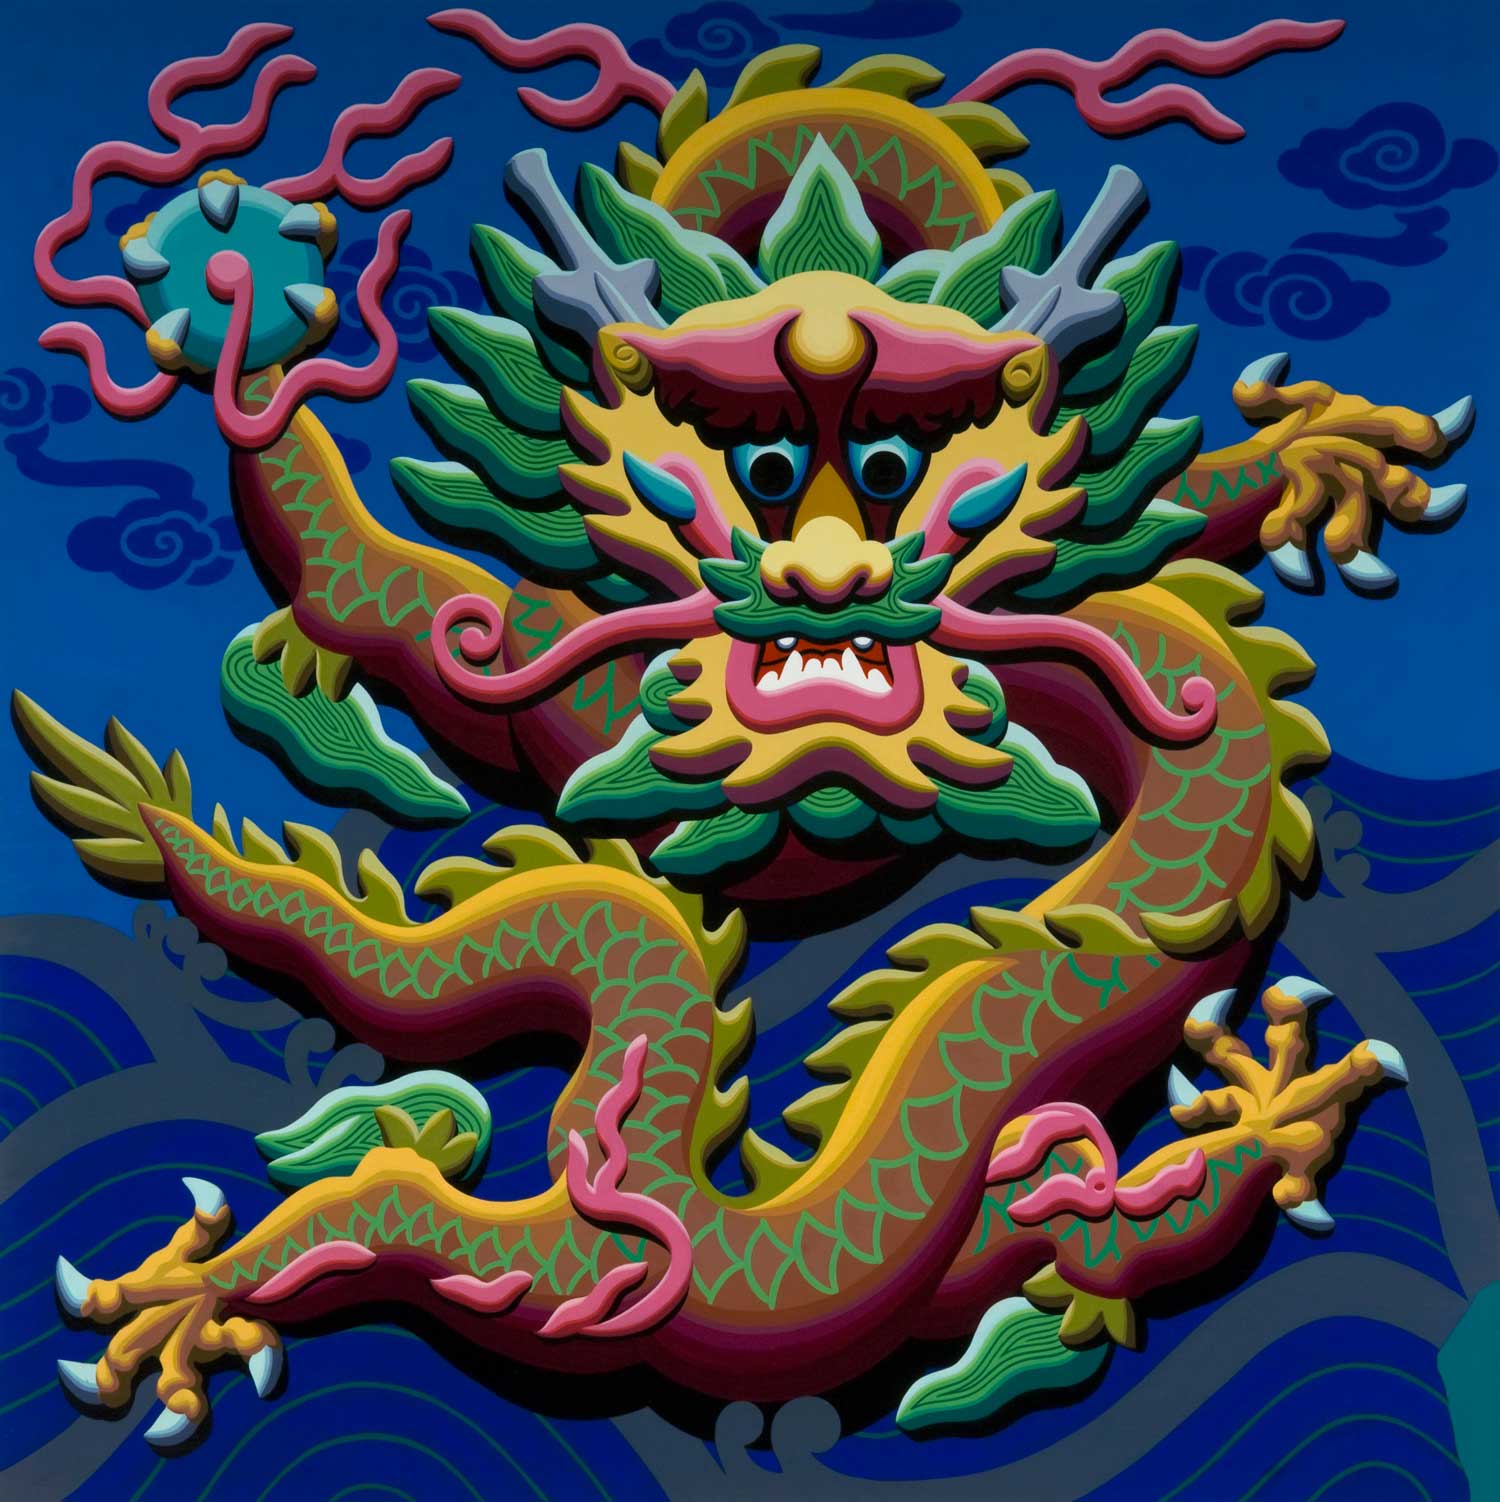 An image of a vibrant Chinese-style dragon with raised surfaces, depicted in a flat two-dimensional form. The dragon's body is curved, with a long and sinuous neck, and it is depicted in vibrant shades of red, gold, and green. The scales and other details of the dragon's body are raised, giving the impression of a textured surface. The dragon's head is adorned with large, expressive eyes, a sharp snout, and a mane of flowing hair. The overall effect is one of dynamic movement and energy, capturing the essence of this legendary creature in a visually striking way.